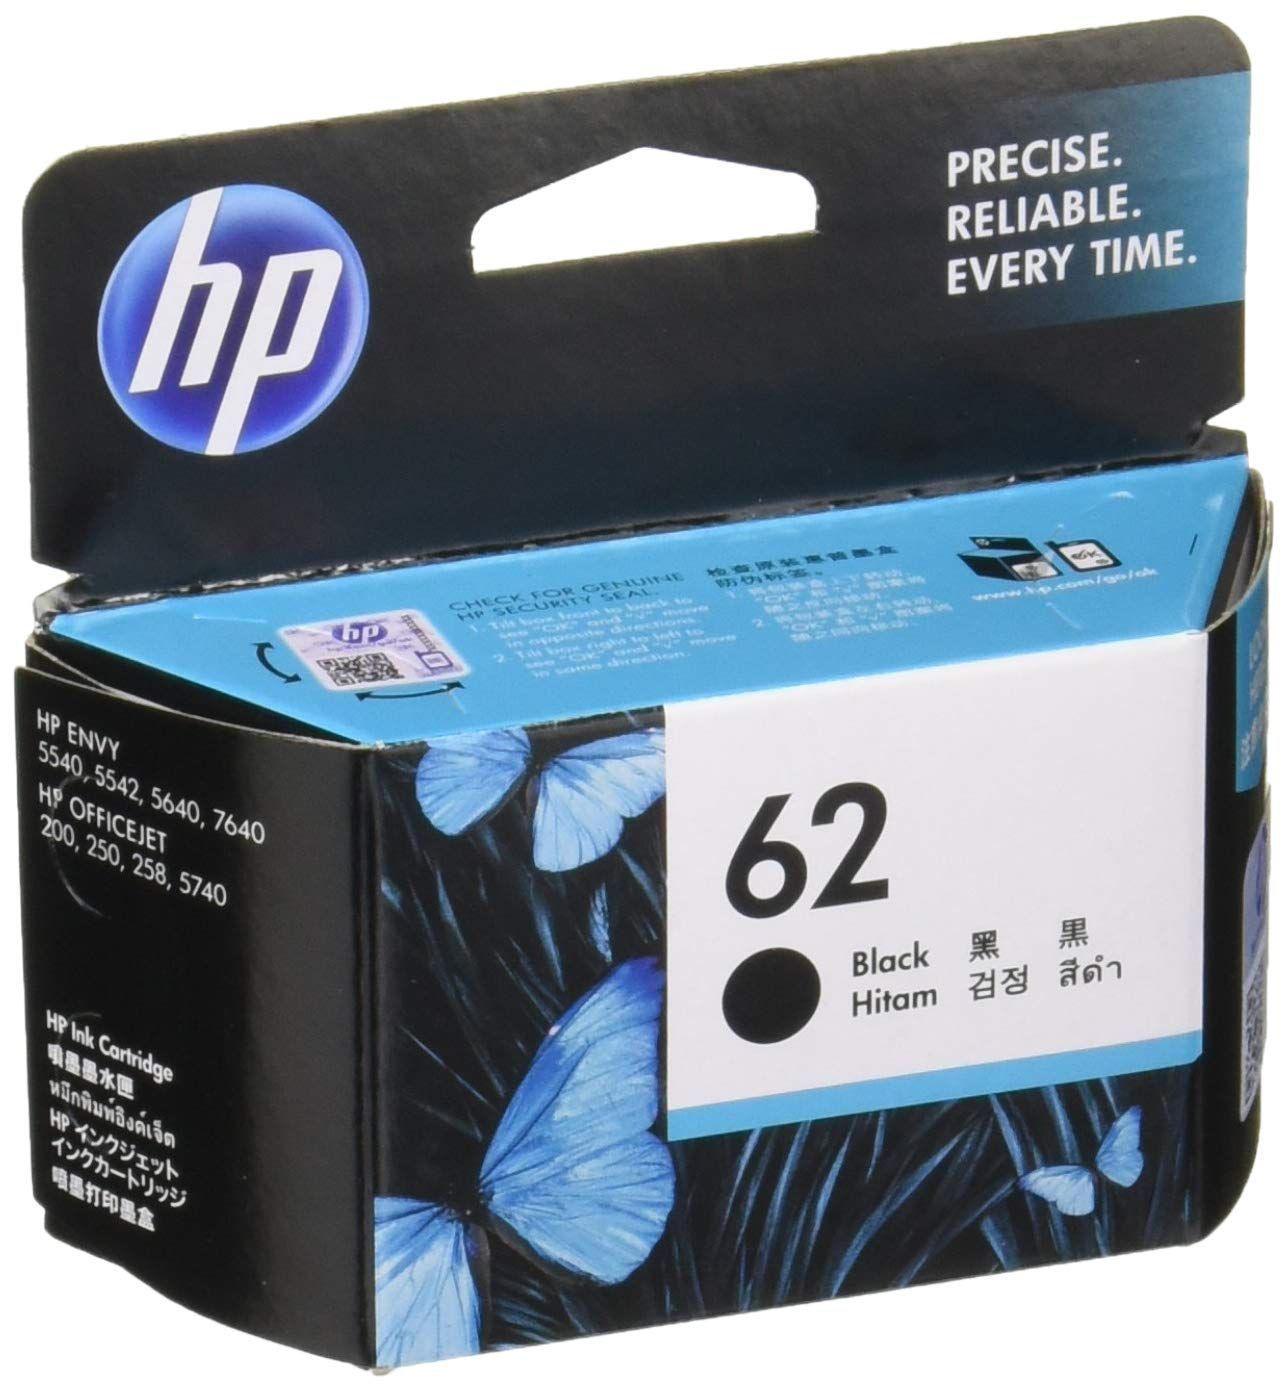 HP プリントカートリッジ 黒 C9730A 1個 プリンター・FAX用インク